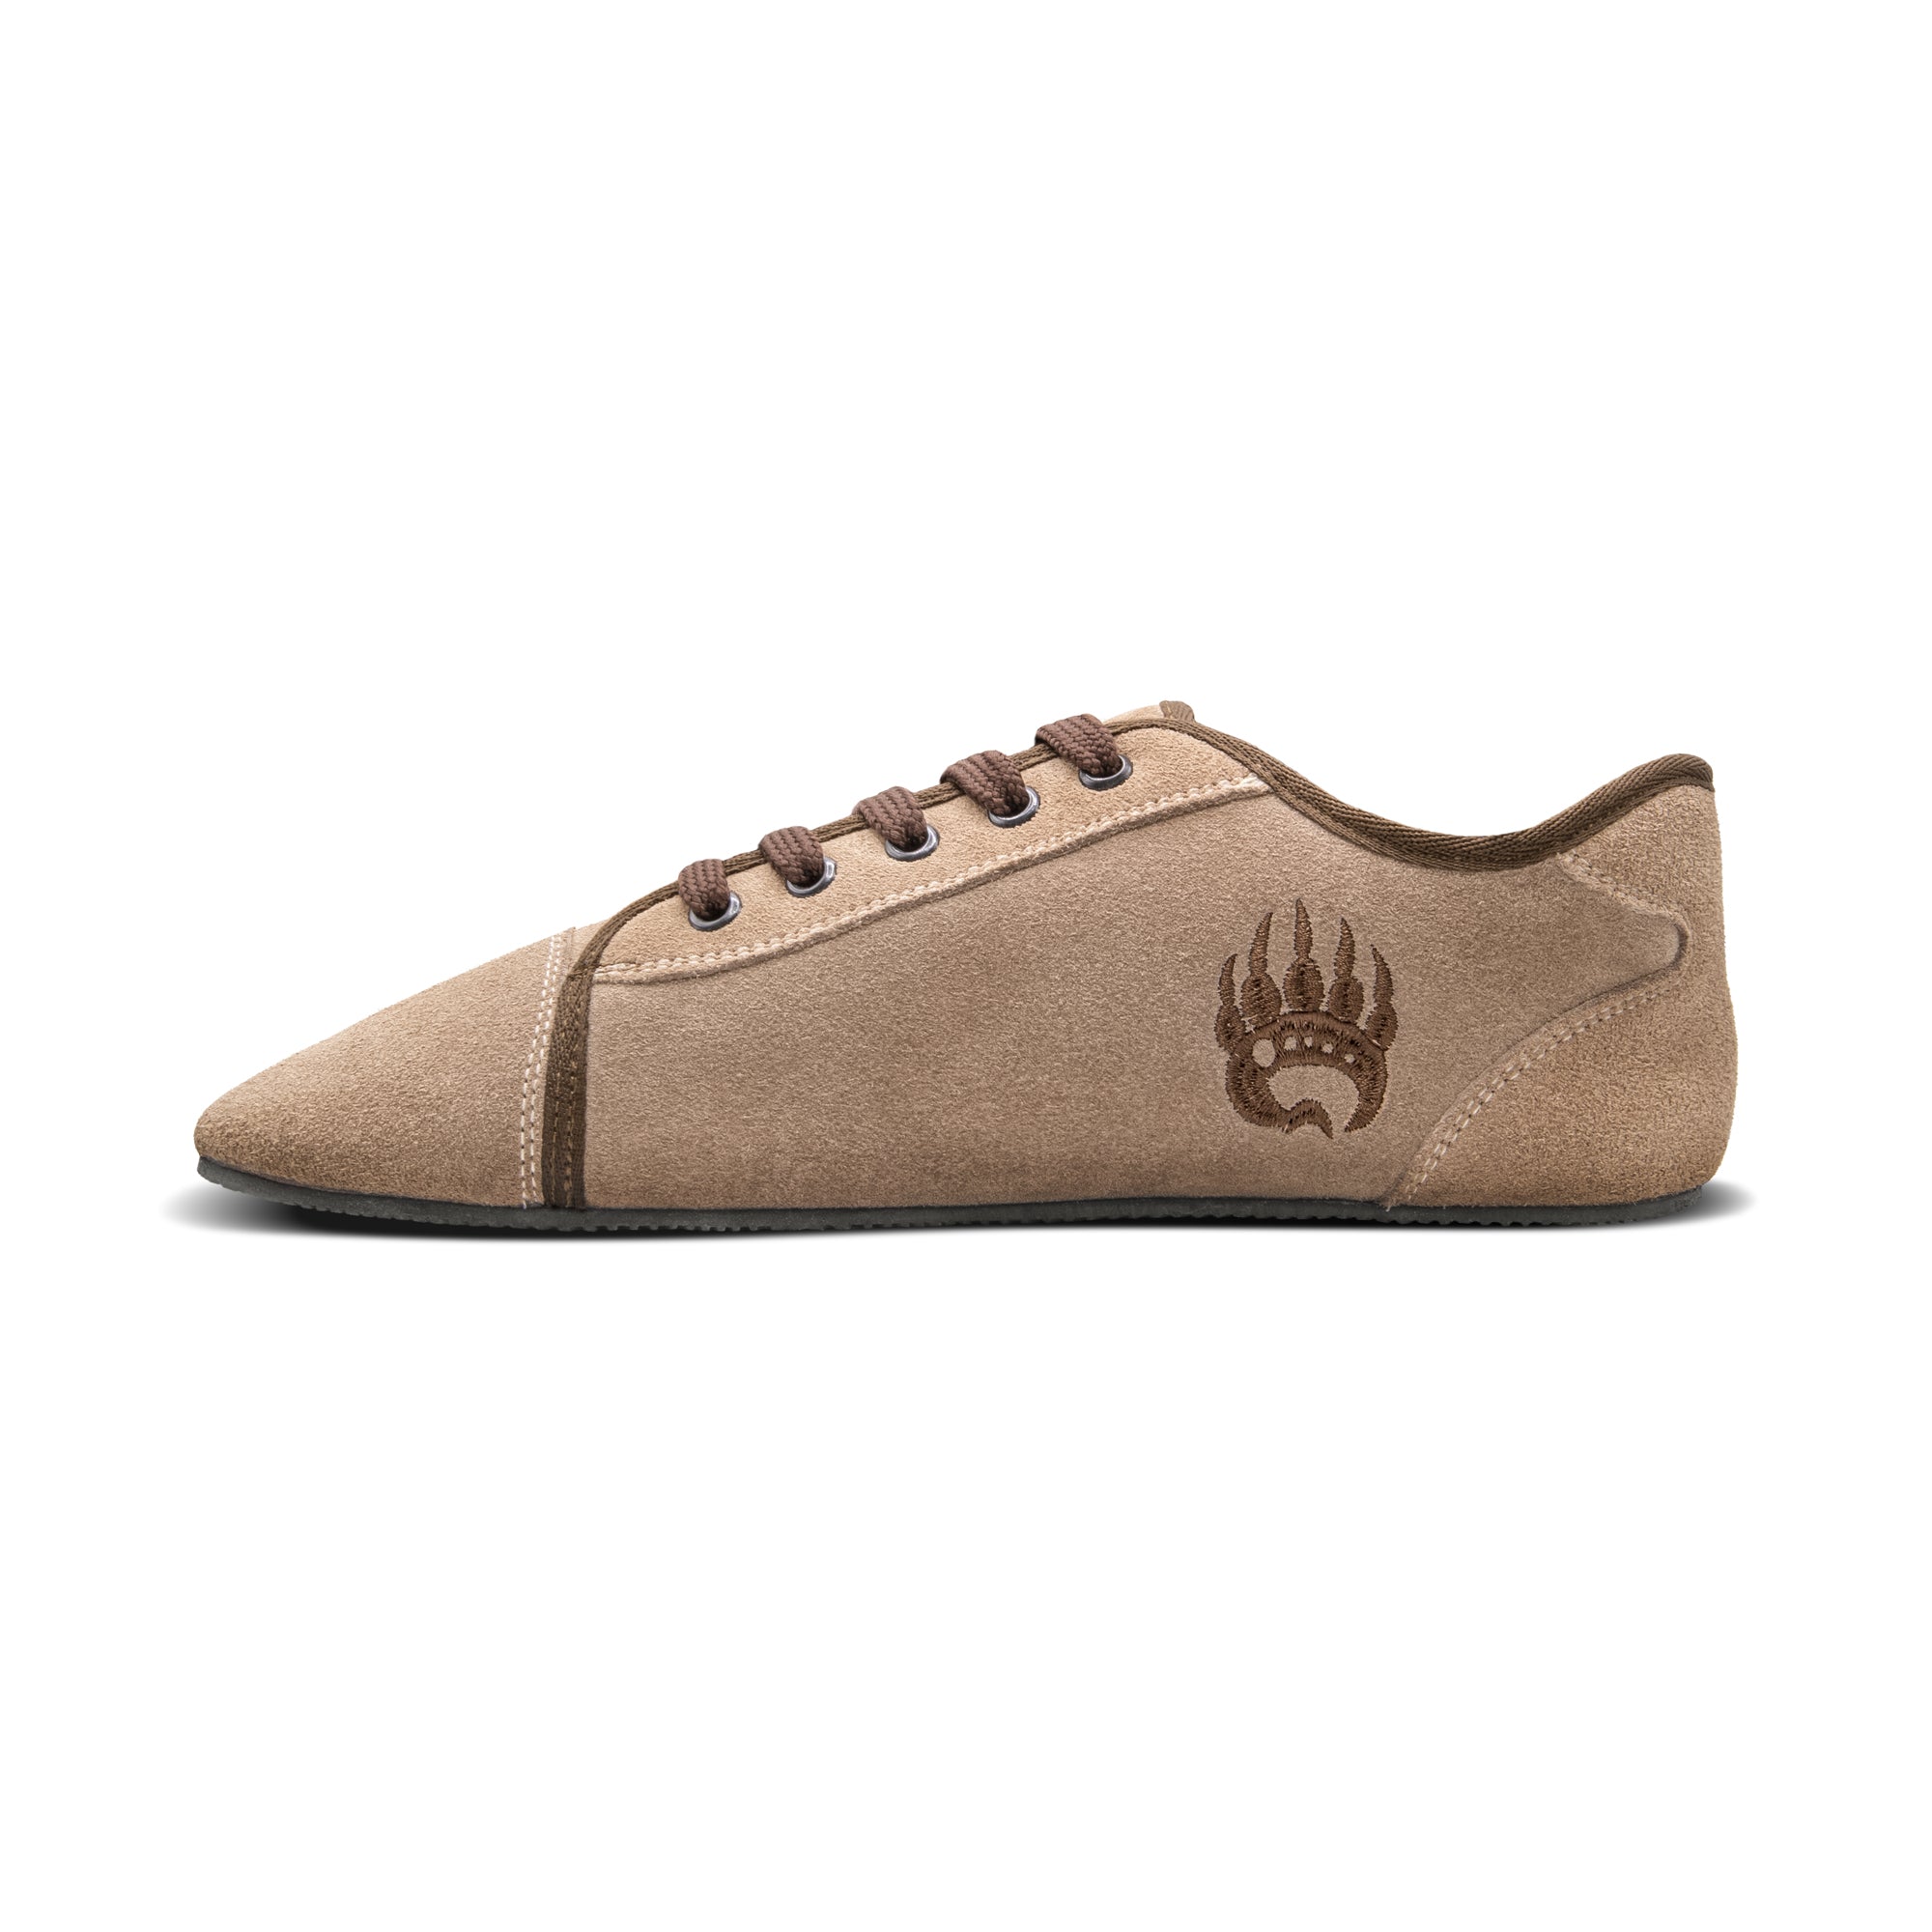 A side view of a light brown genuine suede leather Ursus Suede training sneaker with a dark brown Bearfoot logo on the side, featuring a laced-up front and a sleek design.